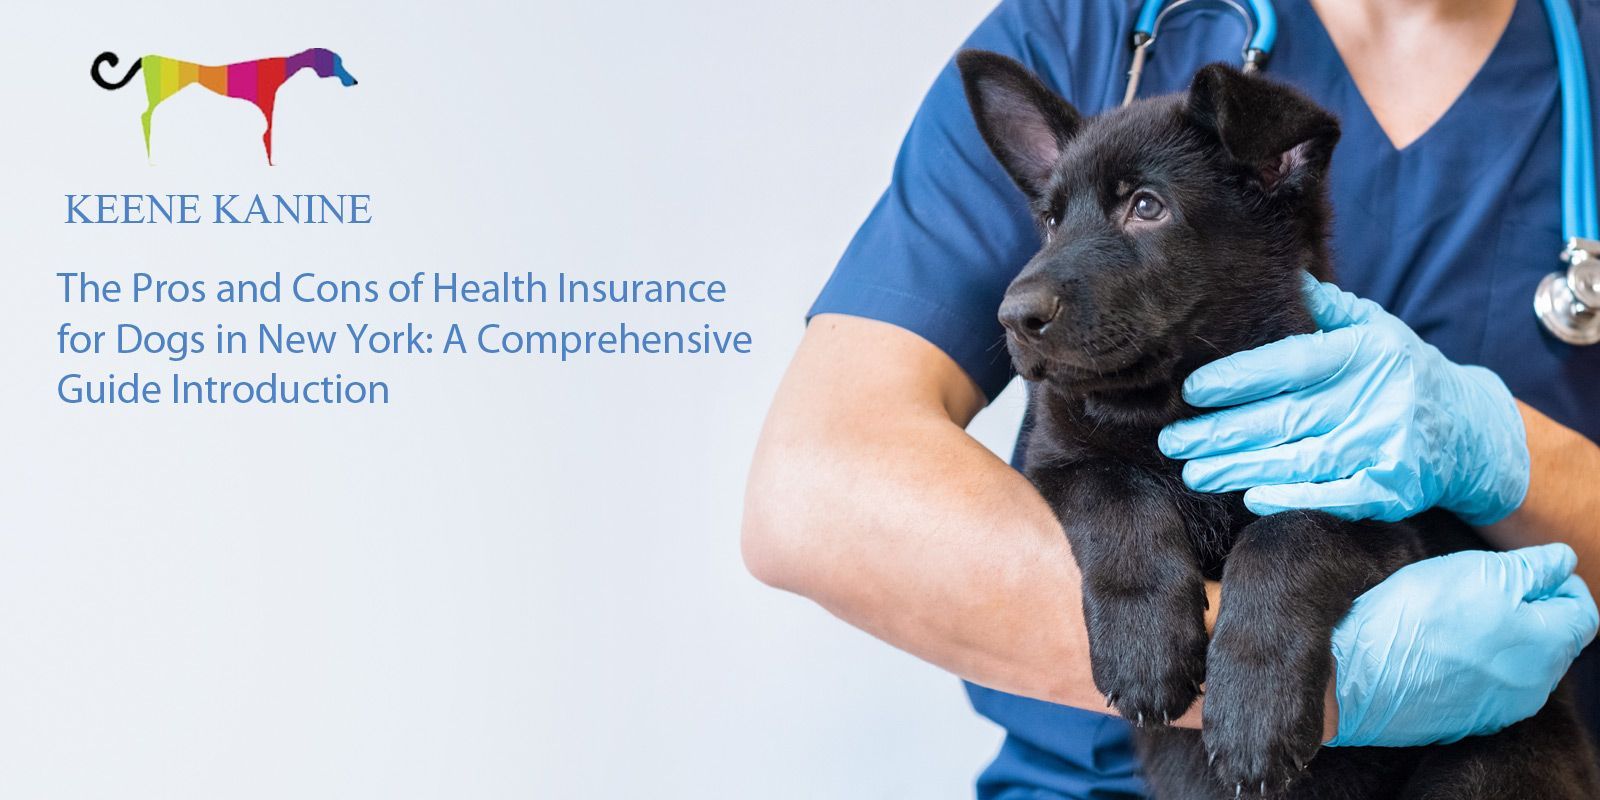 The Pros and Cons of Health Insurance for Dogs in New York: A Comprehensive Guide Introduction